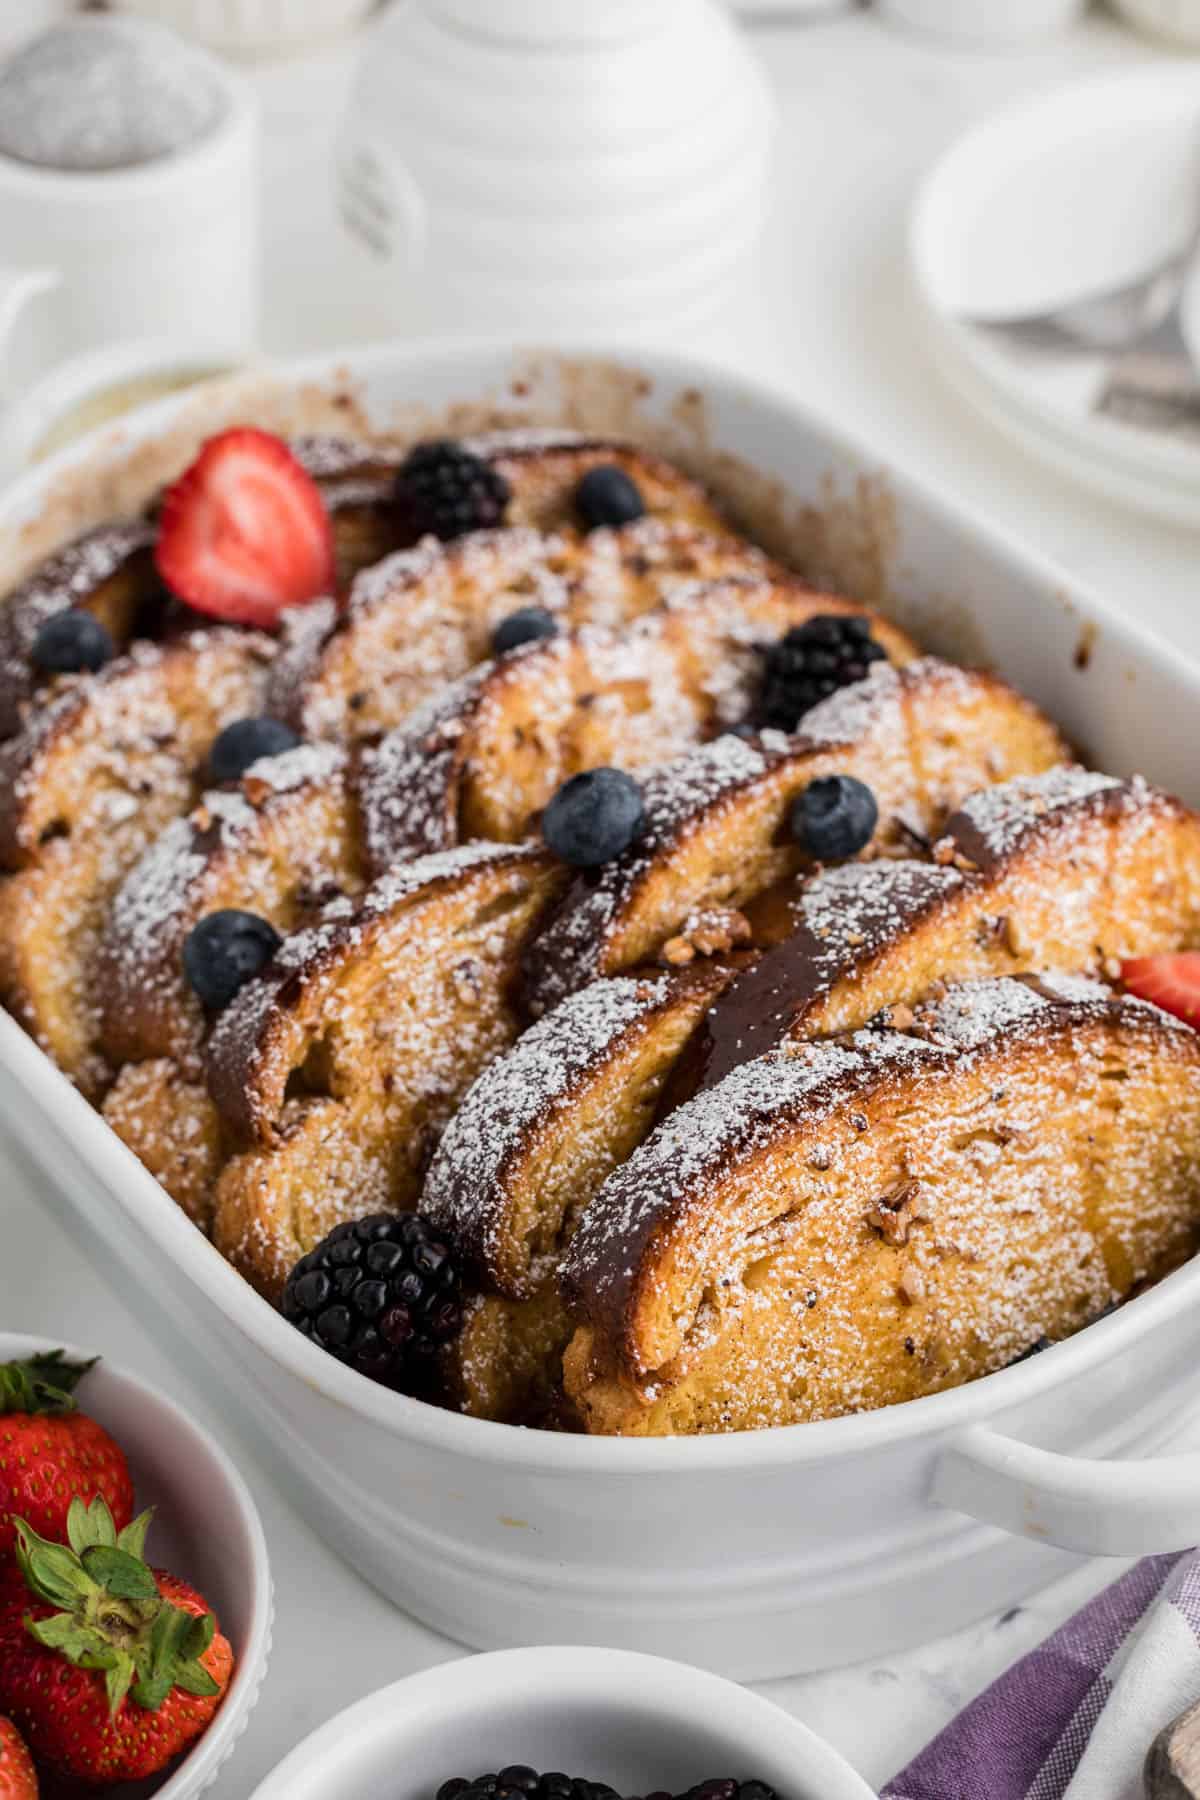 An image of baked overnight french toast in a white baking dish.